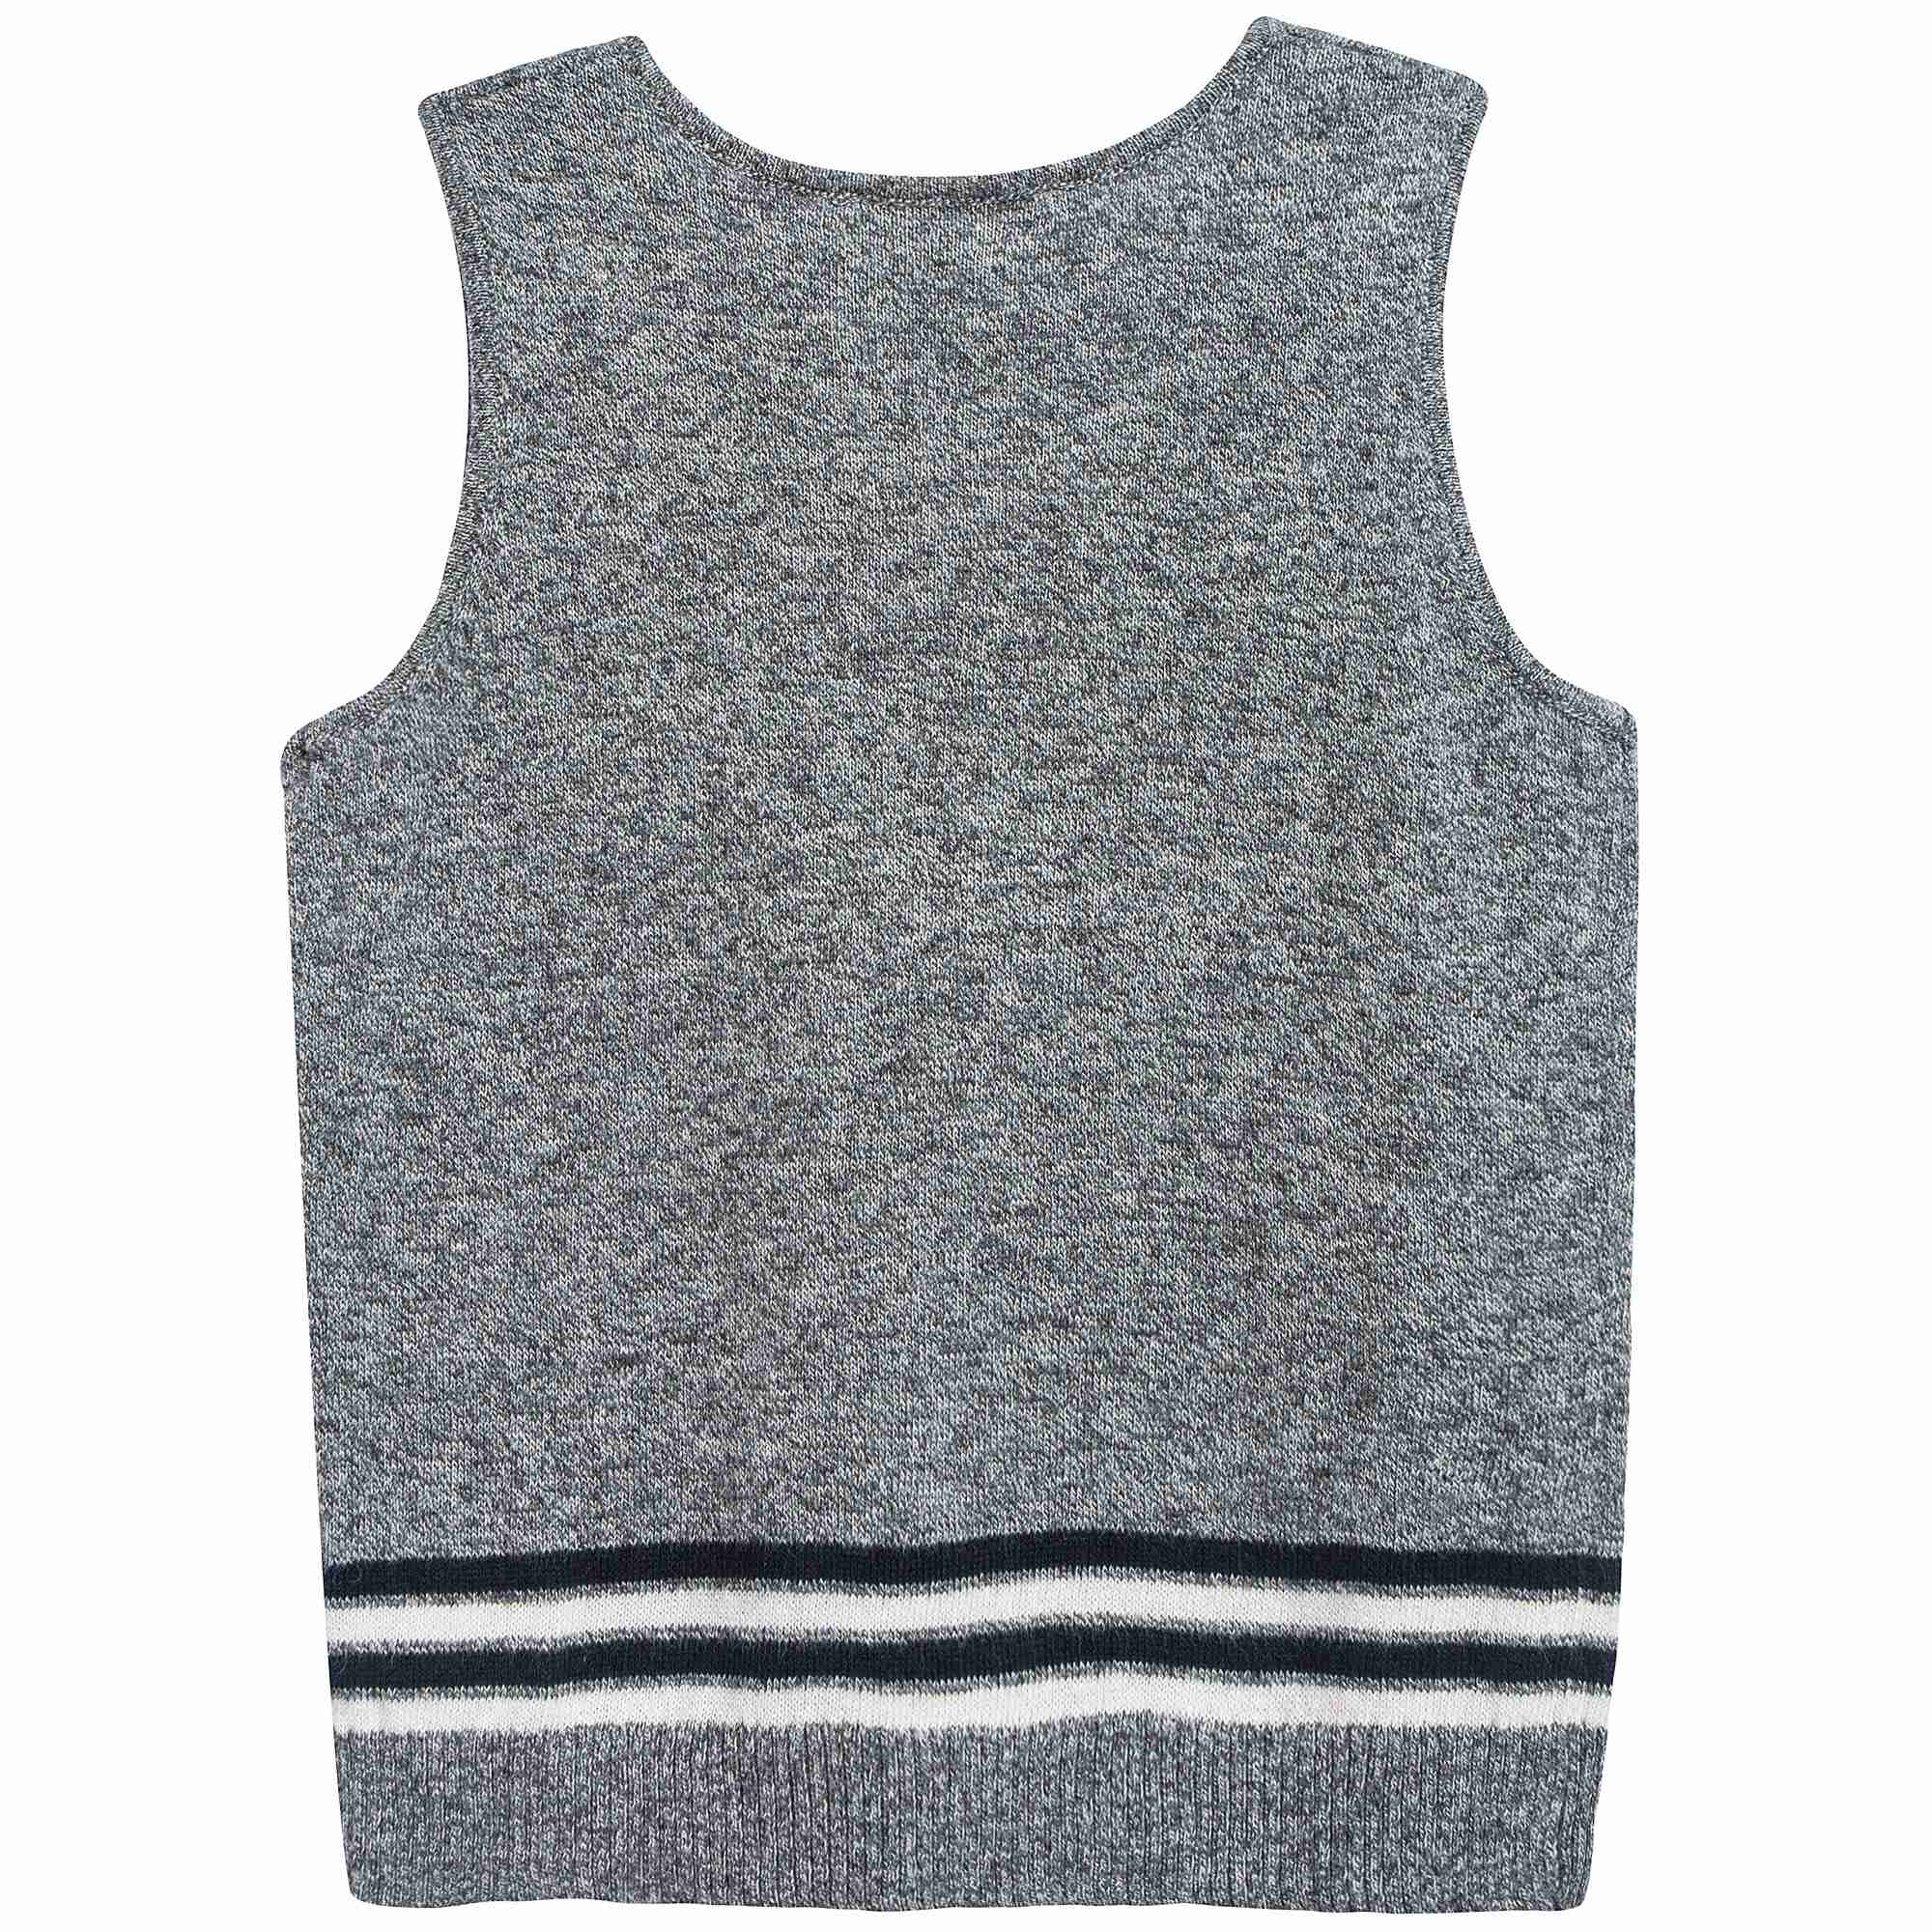 Baby Charcoal Cotton Knitwear Vest